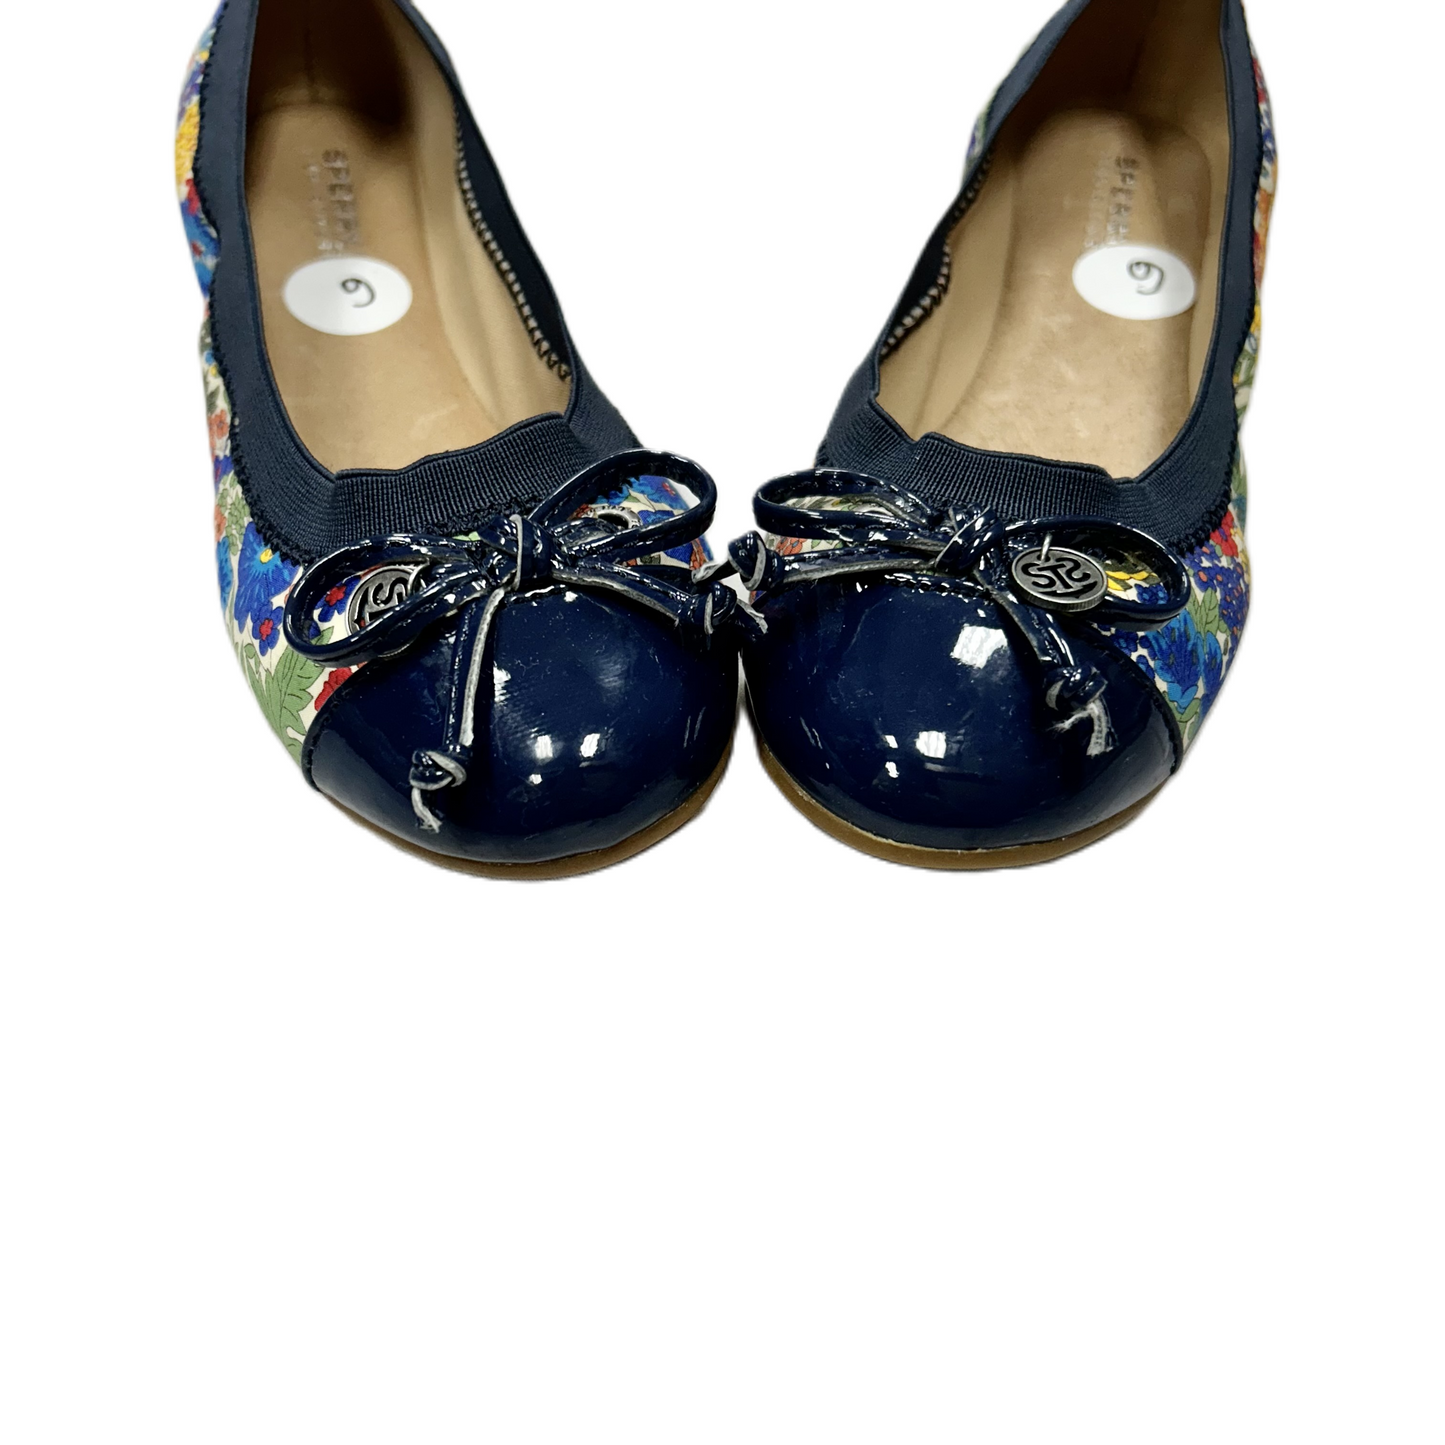 Floral Print Shoes Flats By Sperry, Size: 6